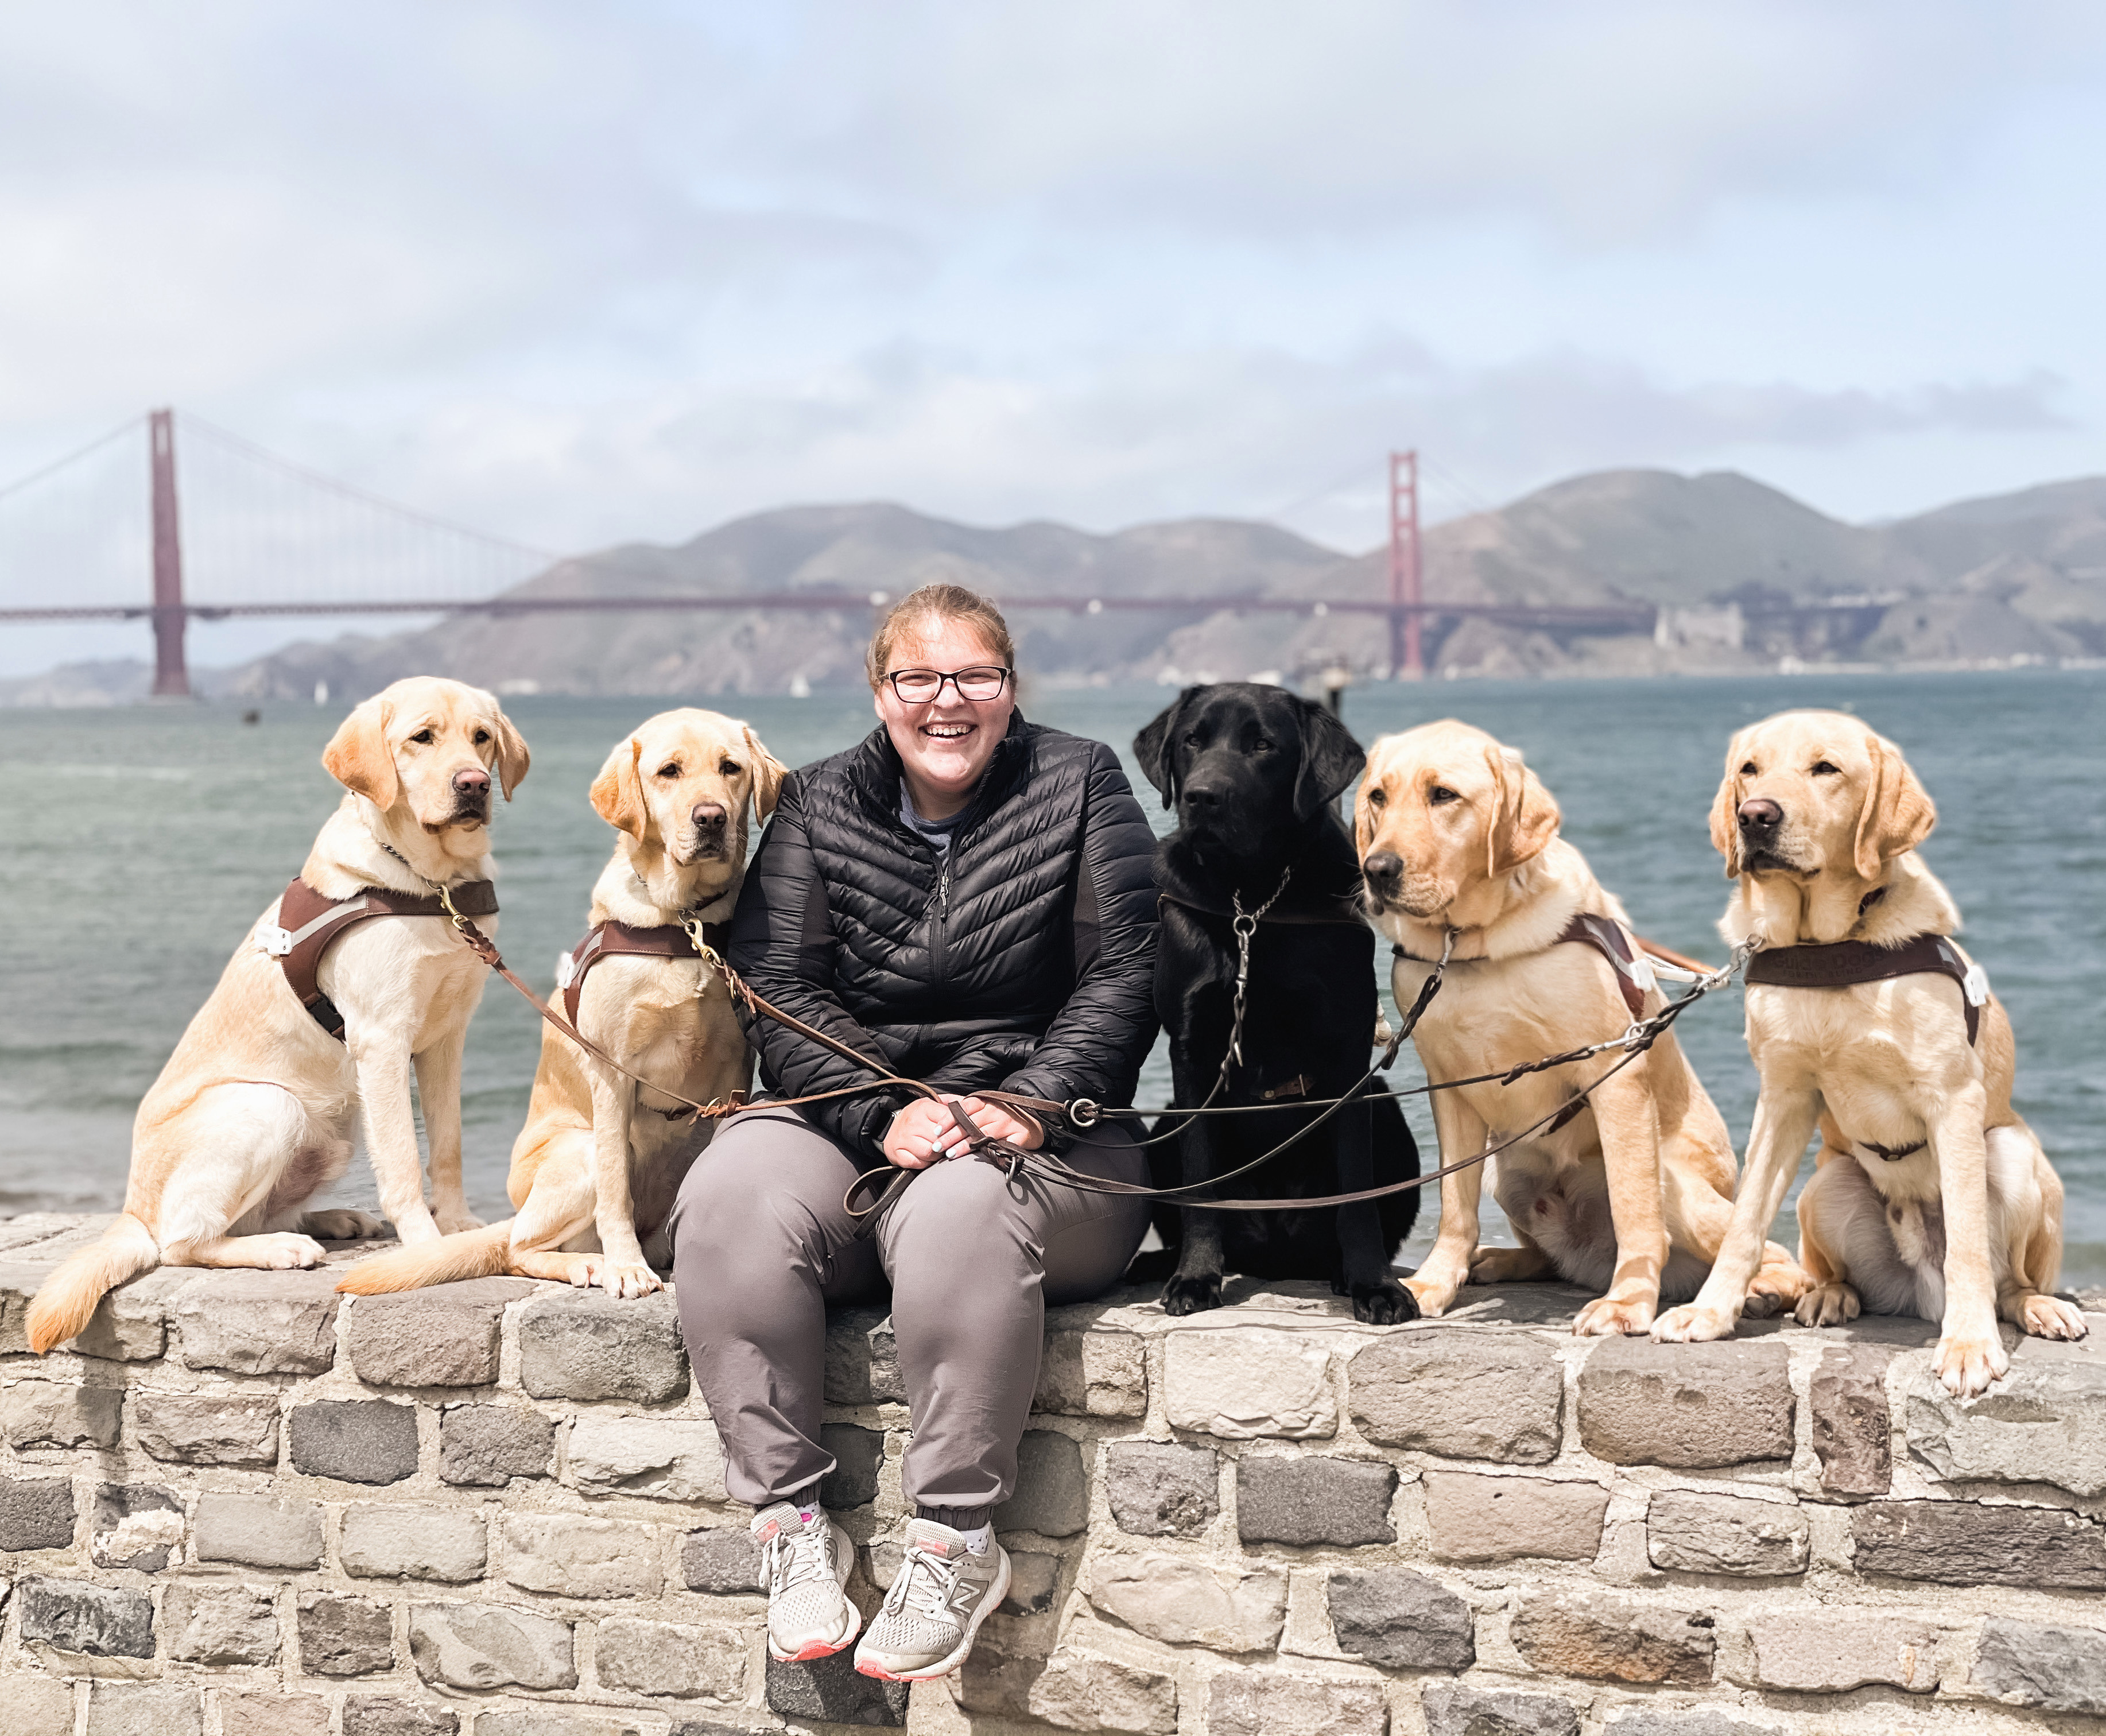 A person sits on a brick bench next to five guide dogs with the Golden Gate Bridge and the San Francisco Bay in the background.